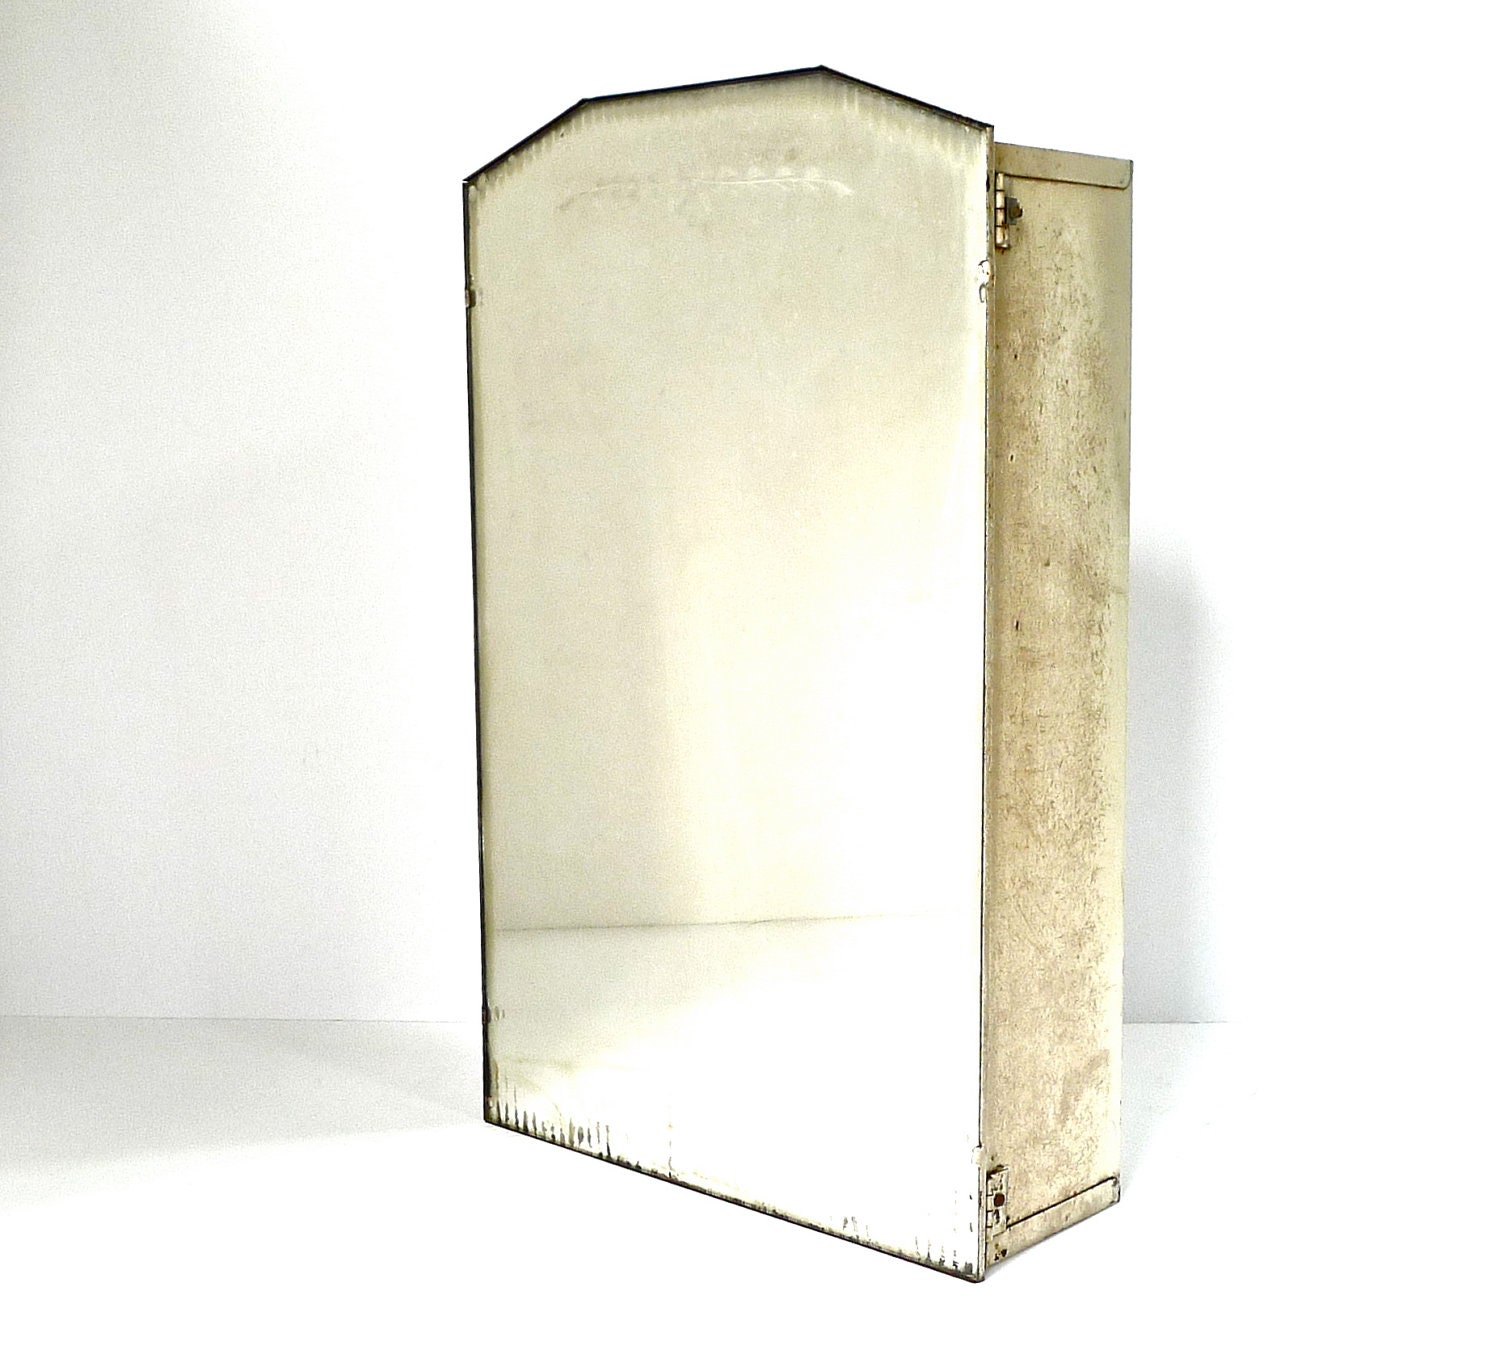 New 148 Vintage Medicine Cabinets With Mirrors